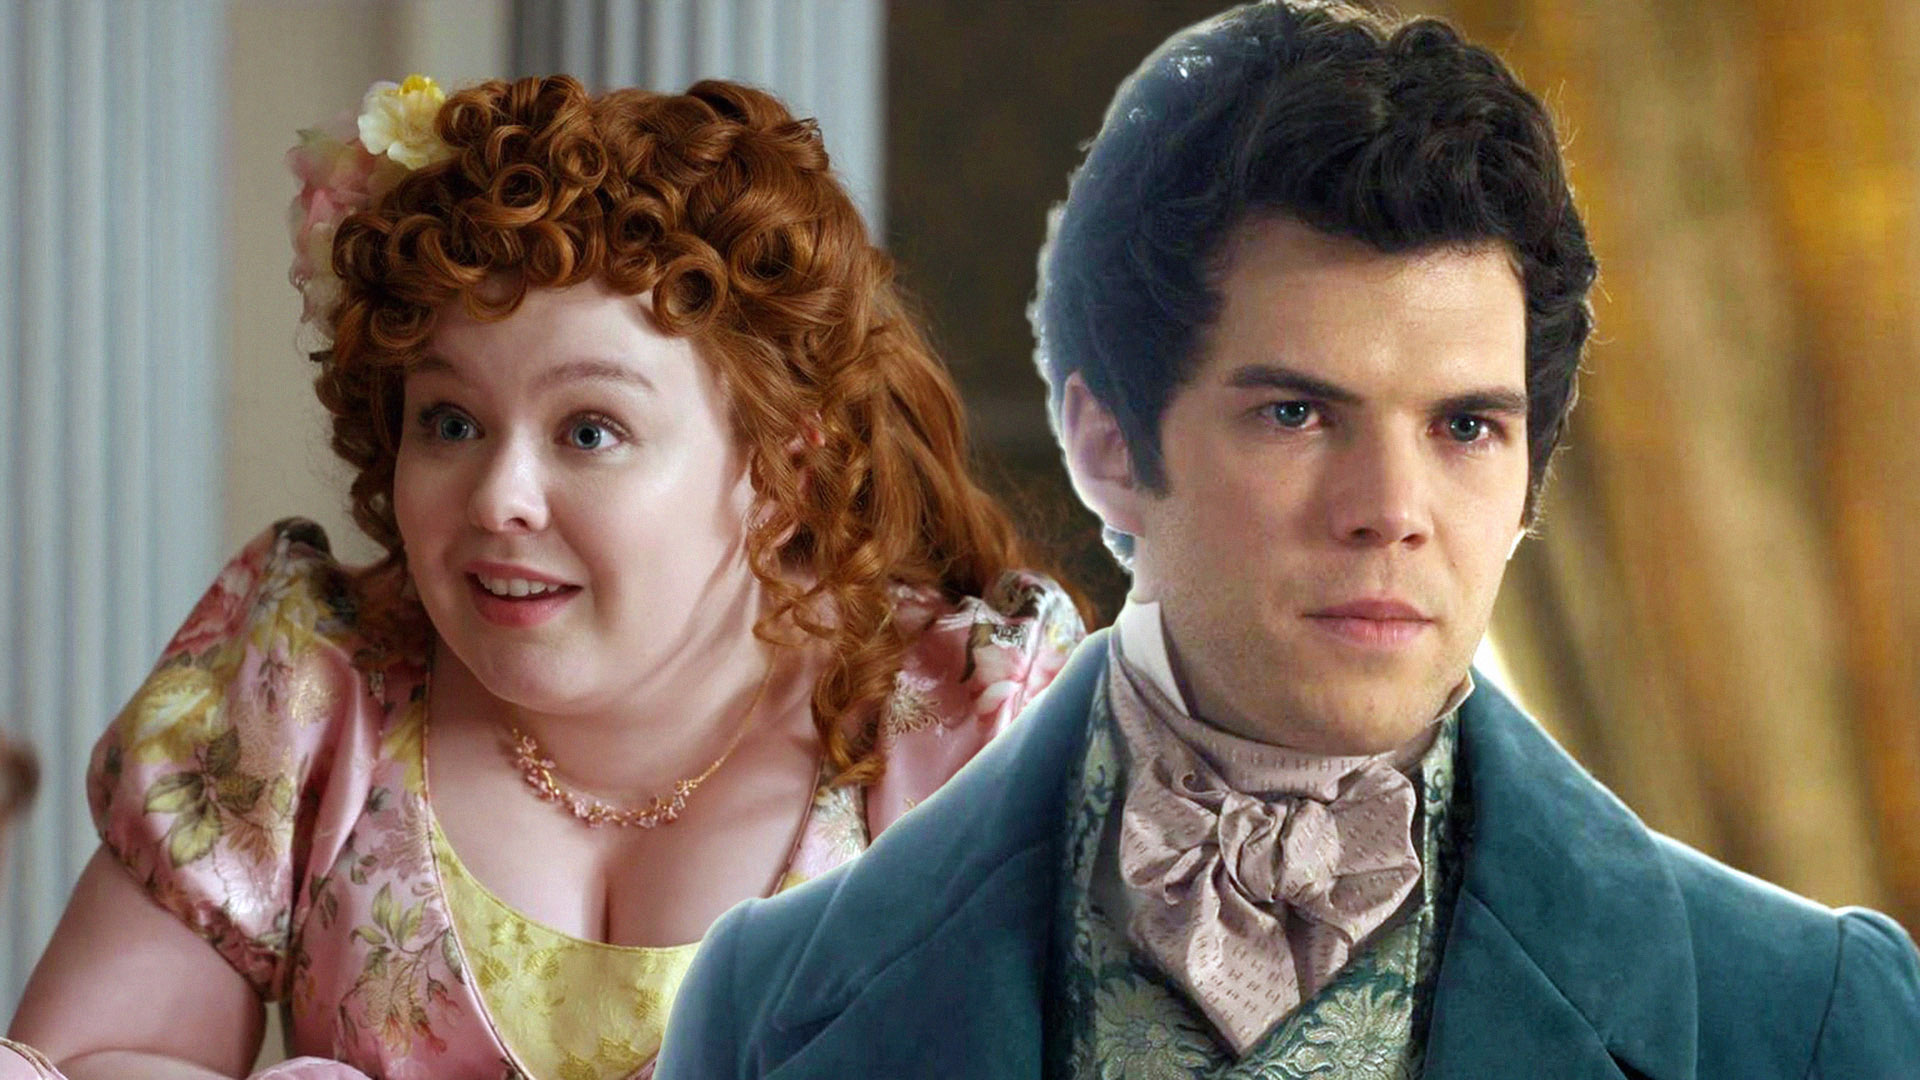 Bridgerton Fans' Wishes: Top 5 Things People Want to See Happening in Season 3